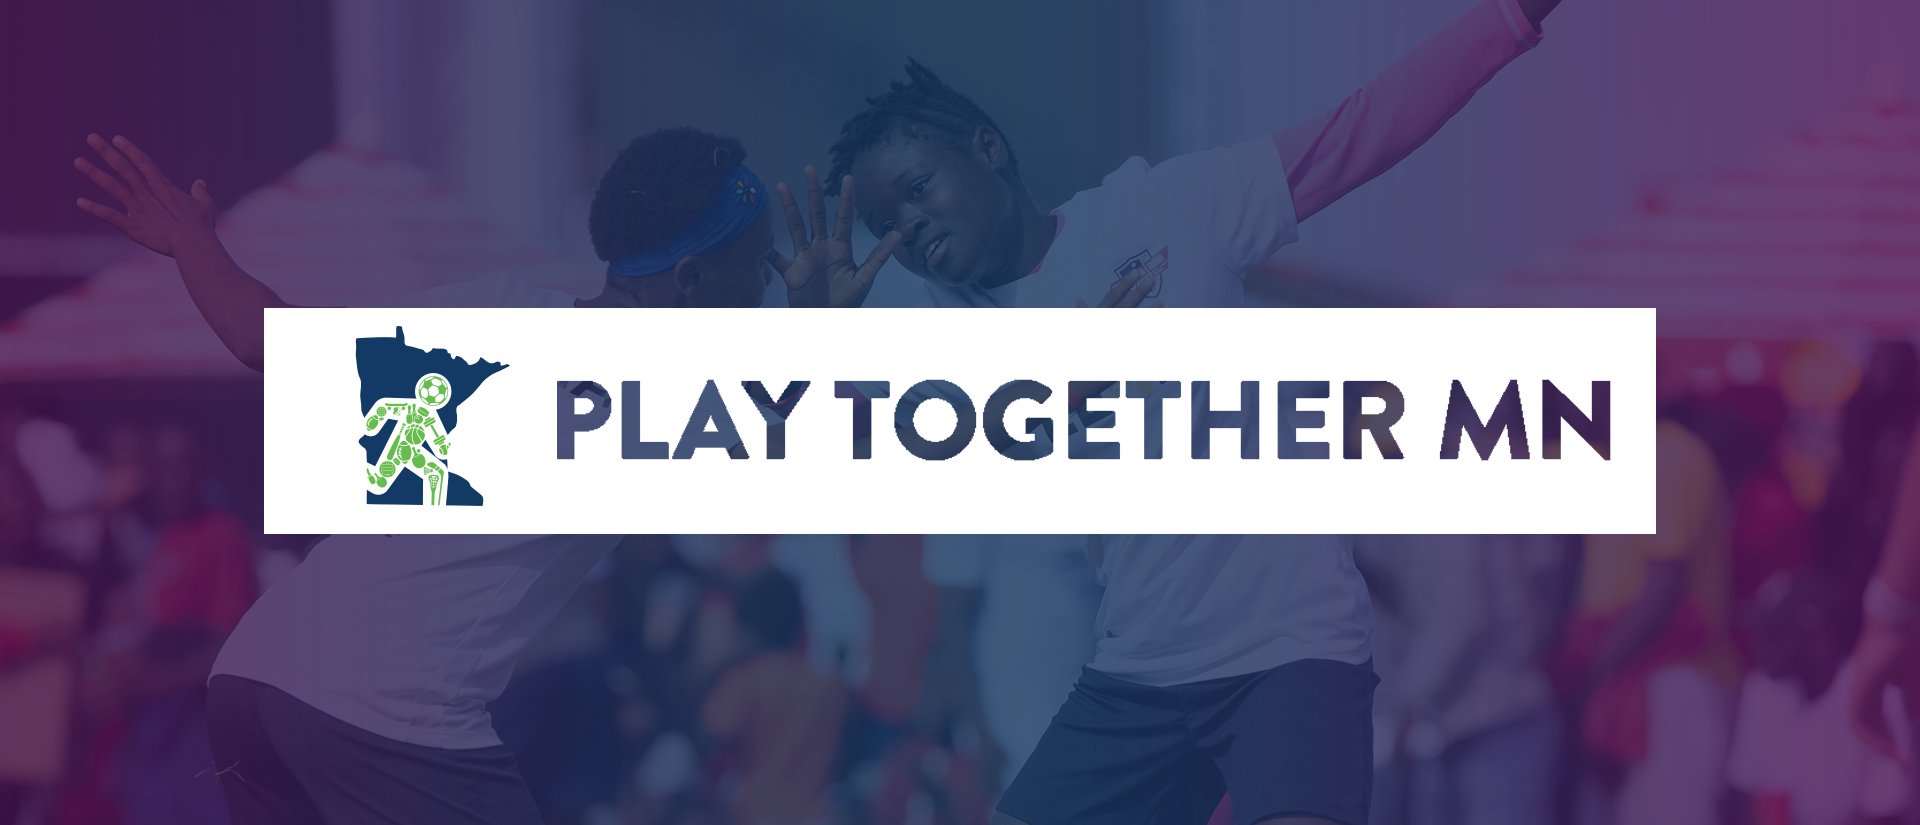 PLAY TOGETHER MN 2021-2